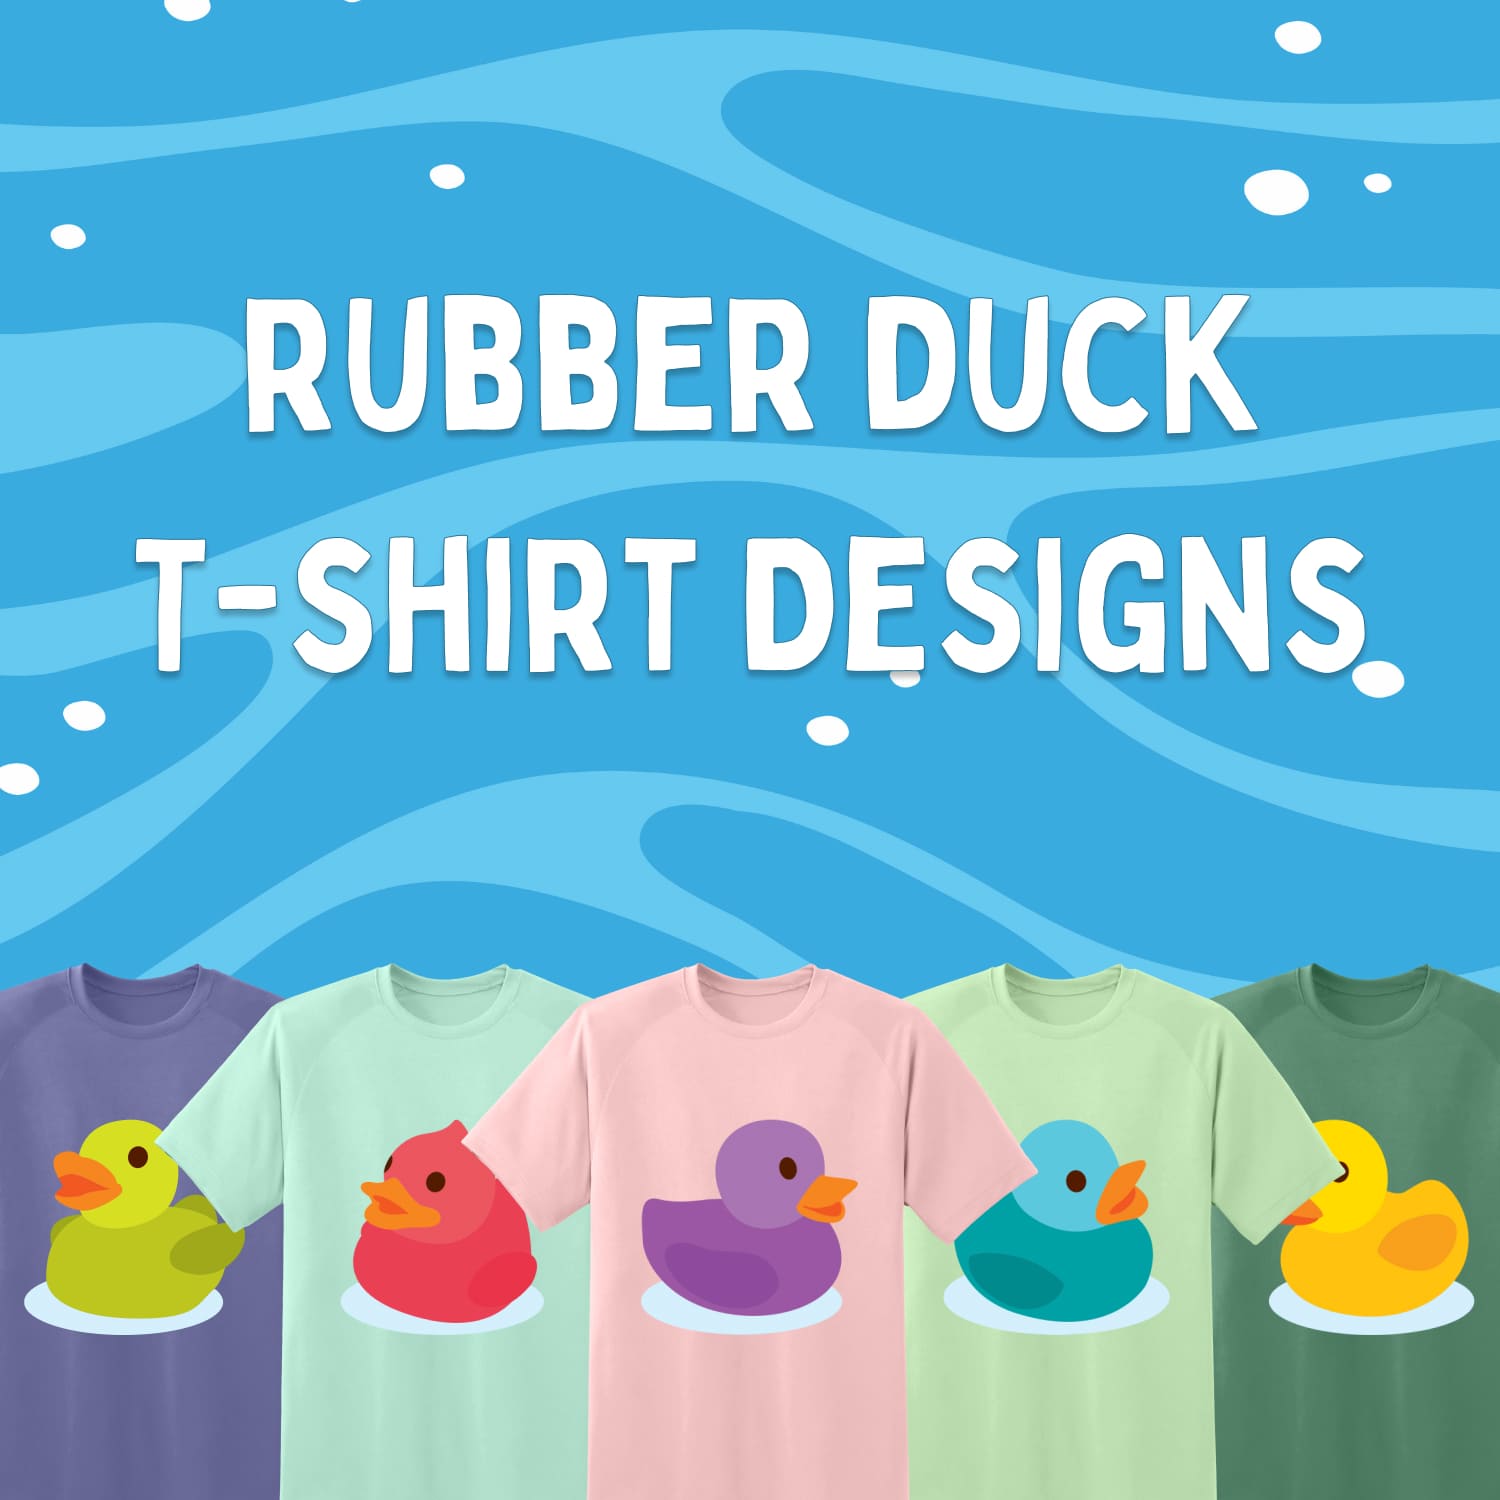 A selection of images of T-shirts with colorful prints of rubber ducks.